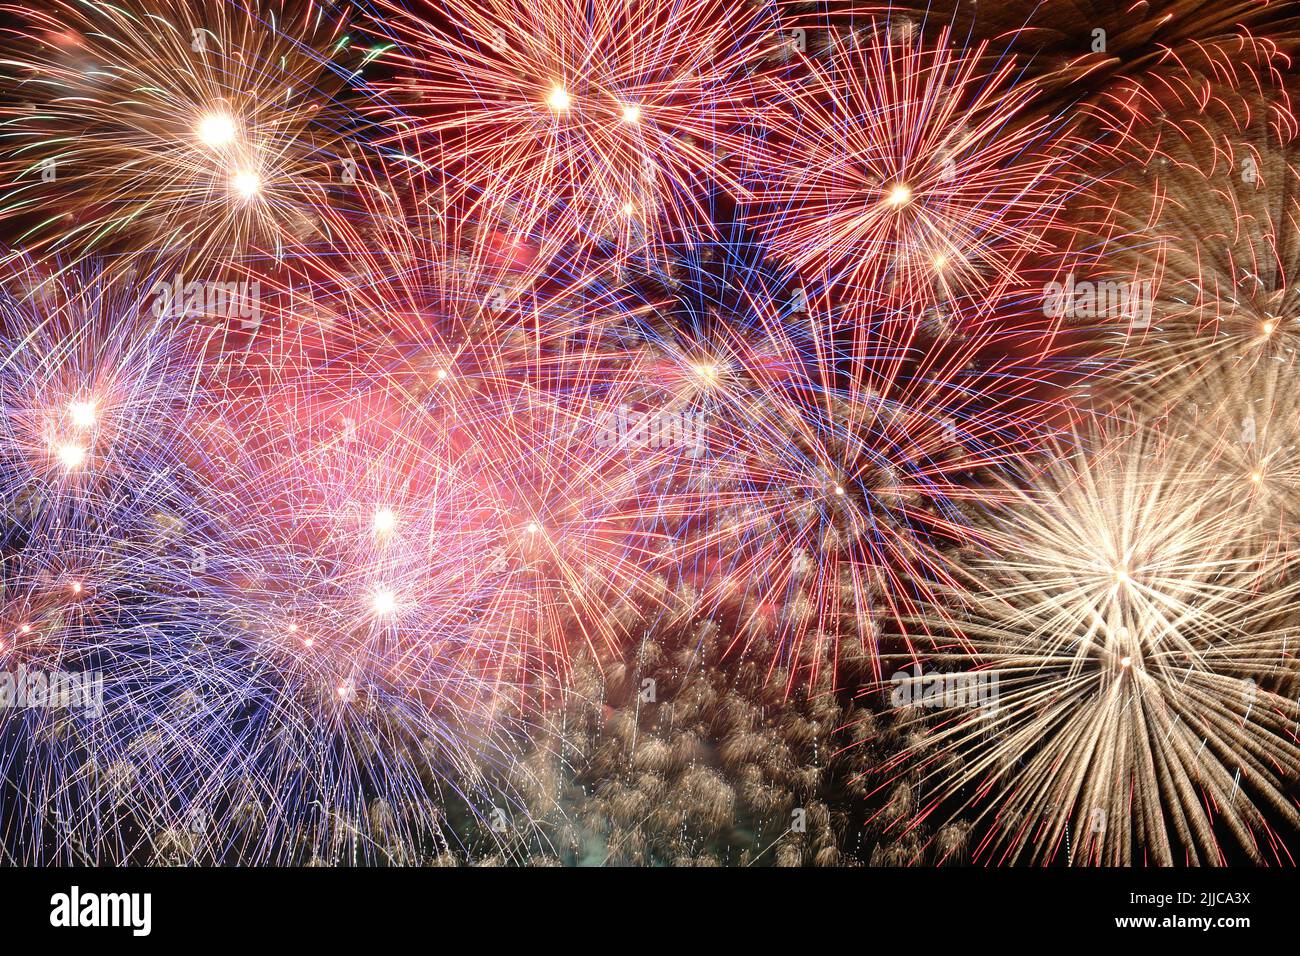 Night sky filled with colorful fireworks Stock Photo